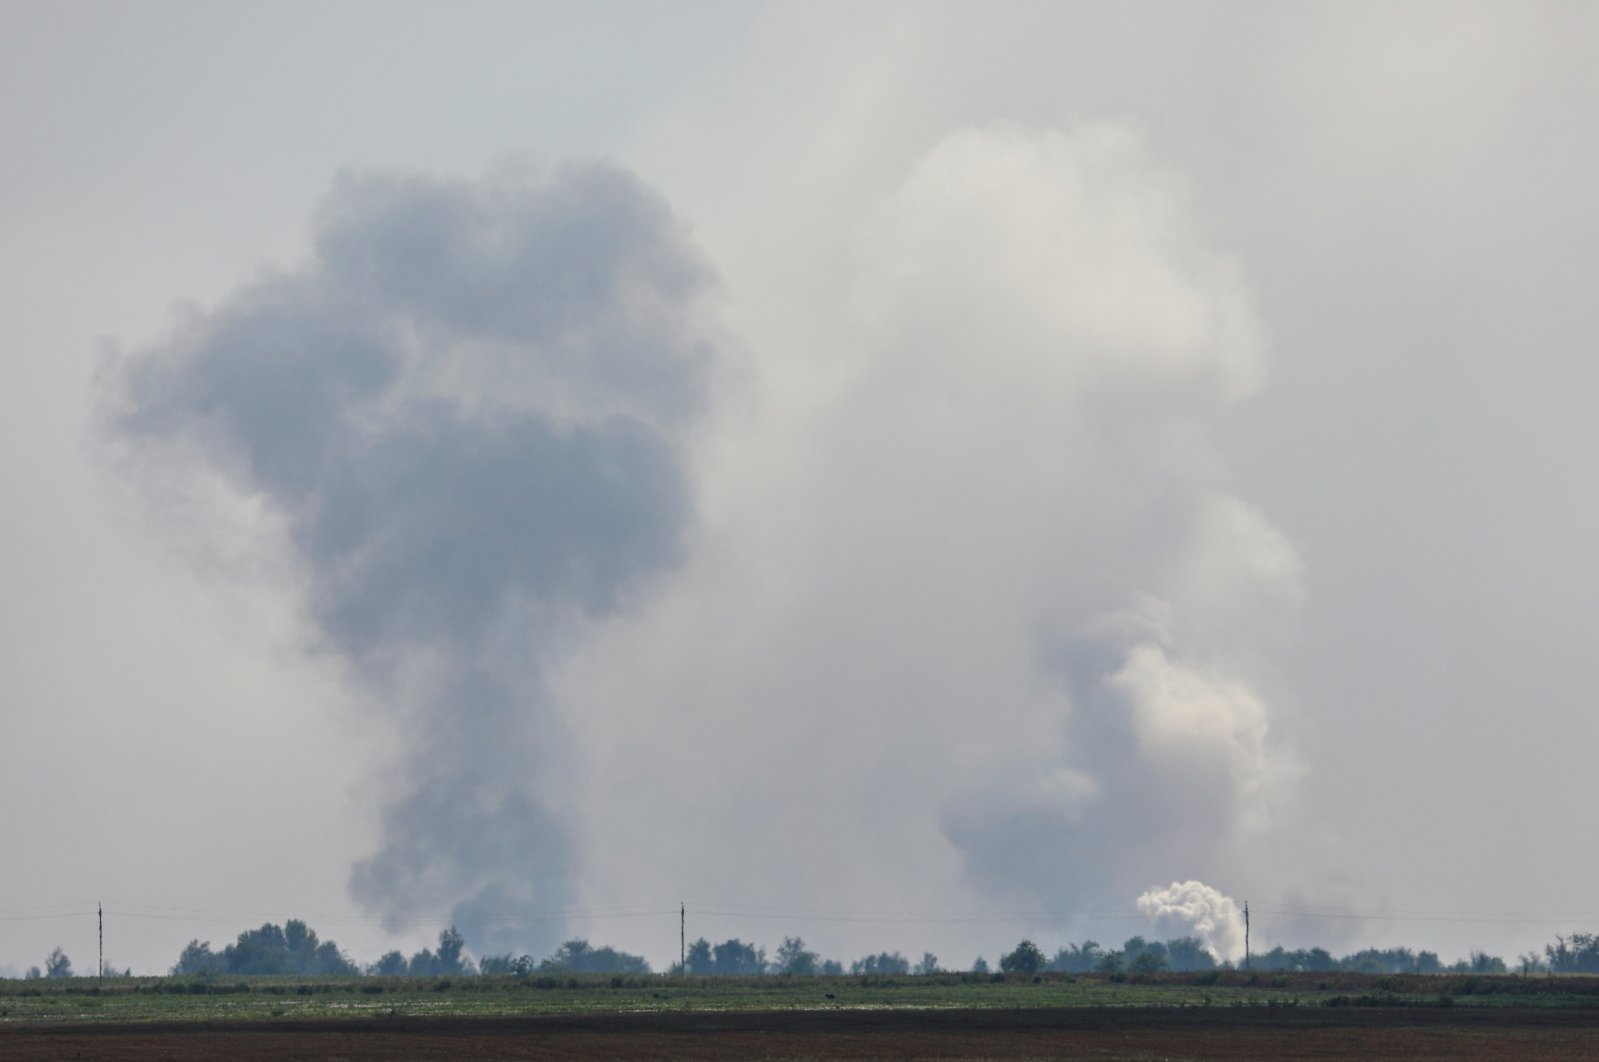 A view shows smoke rising above the area following an alleged explosion in the village of Mayskoye in the Dzhankoi district, Crimea, Ukraine, Aug. 16, 2022. (Reuters Photo)